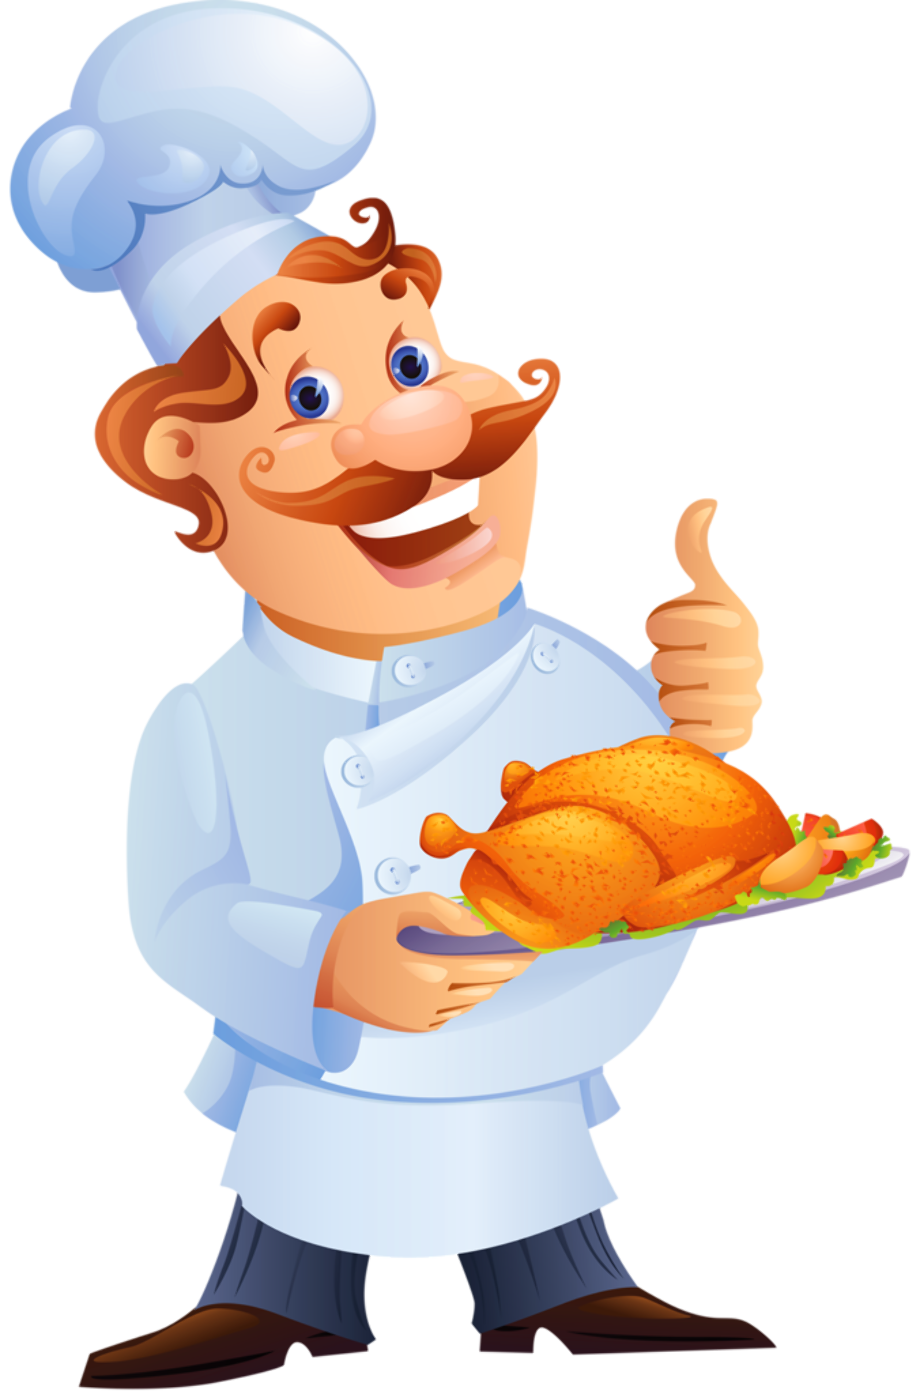 Download High Quality Food clipart chef cartoon Transparent PNG Images